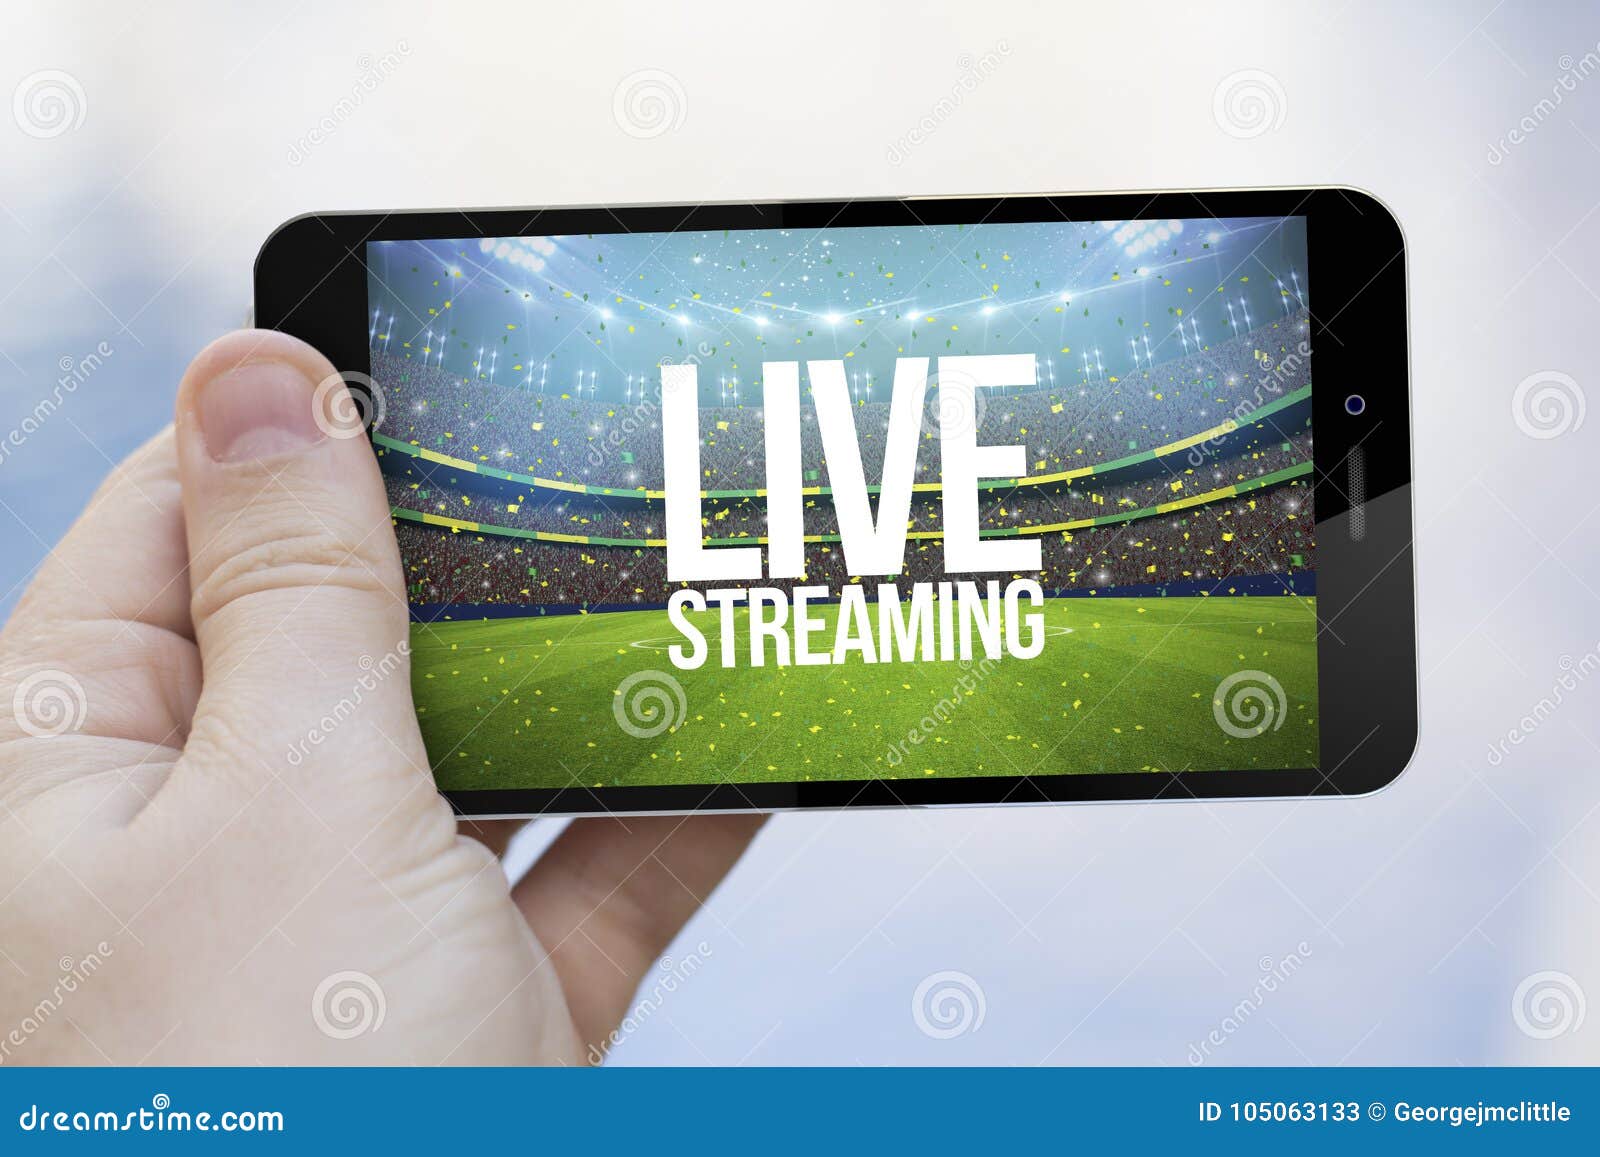 live streaming cell phone